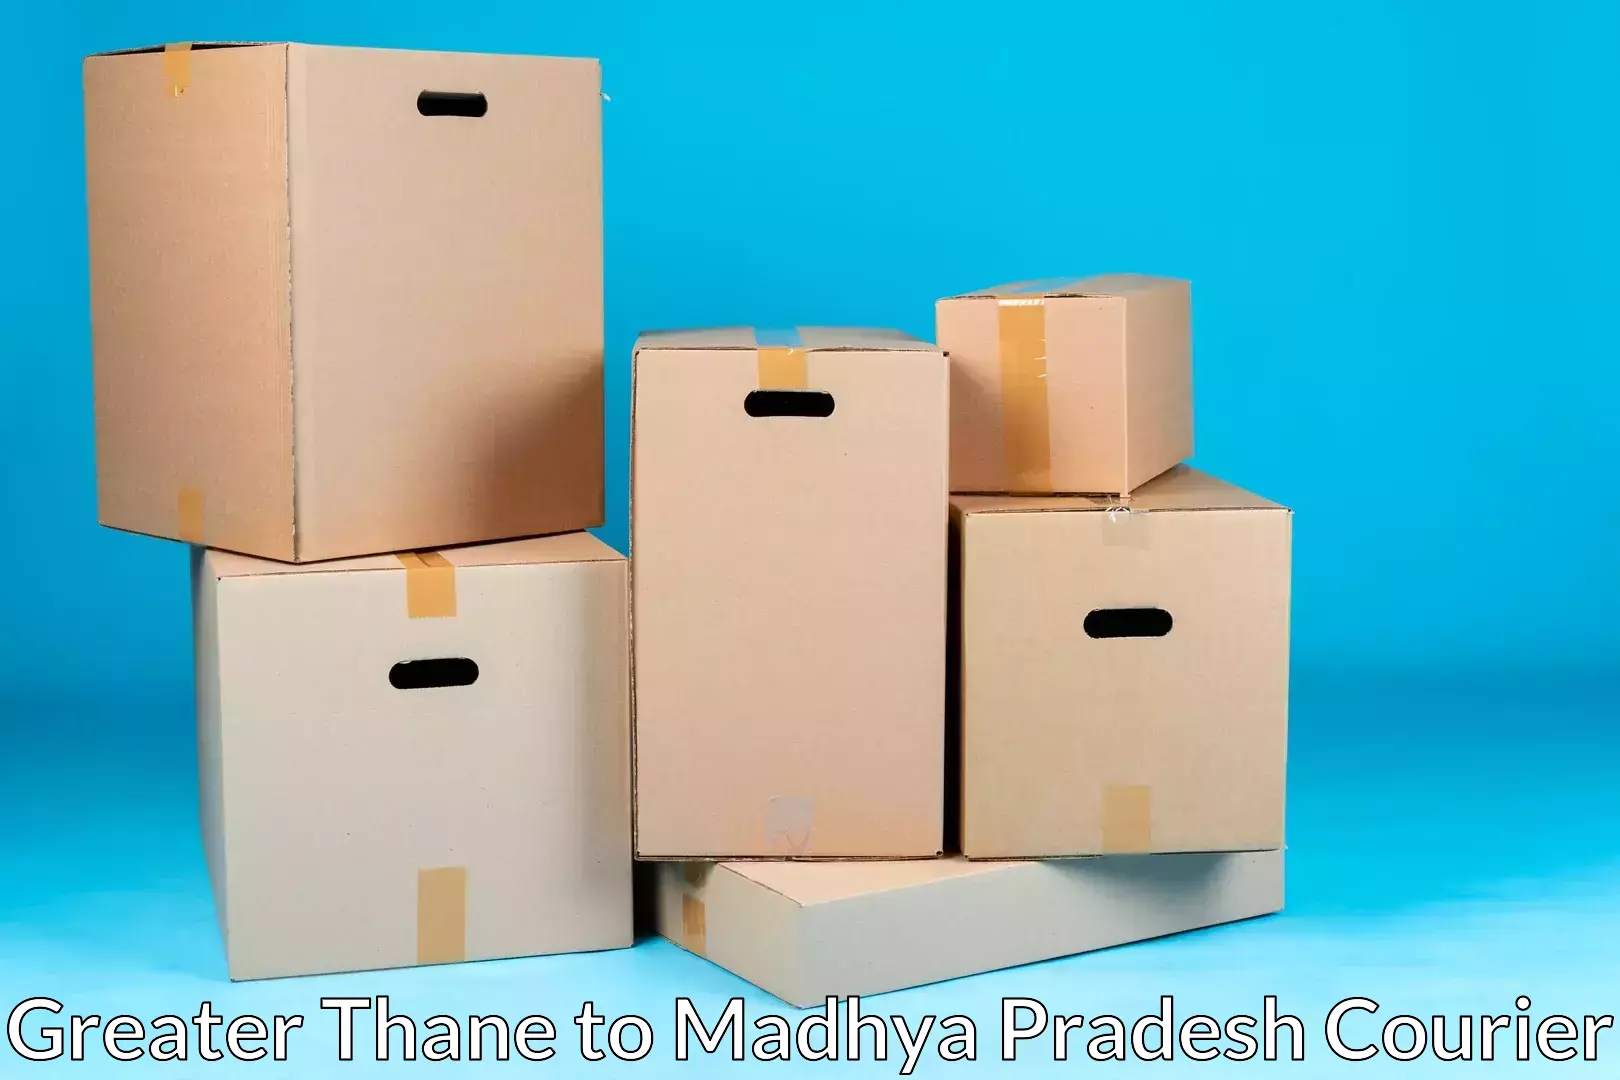 Residential moving experts Greater Thane to Bhanpura